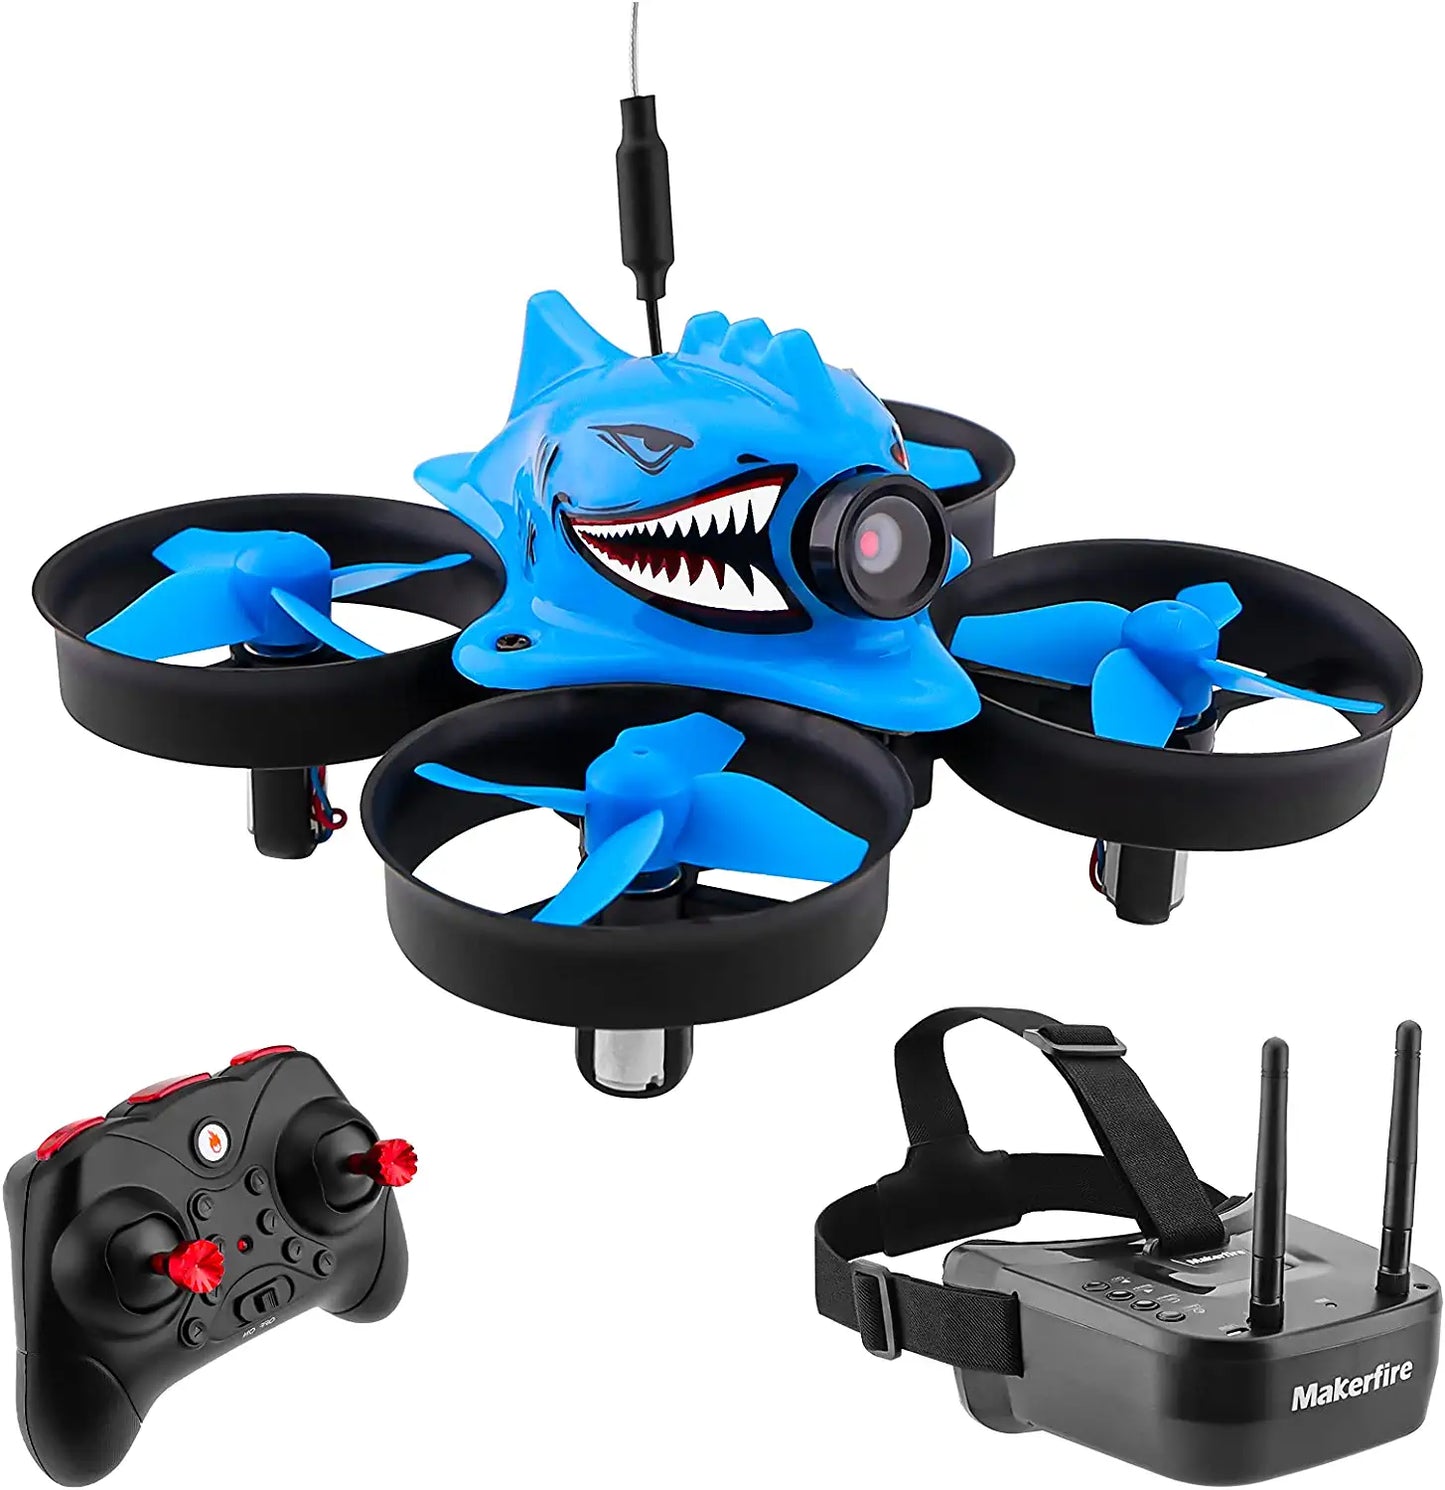 TCMMRC Junior Racer Mini Drone with Camera for Youth Fpv Racing